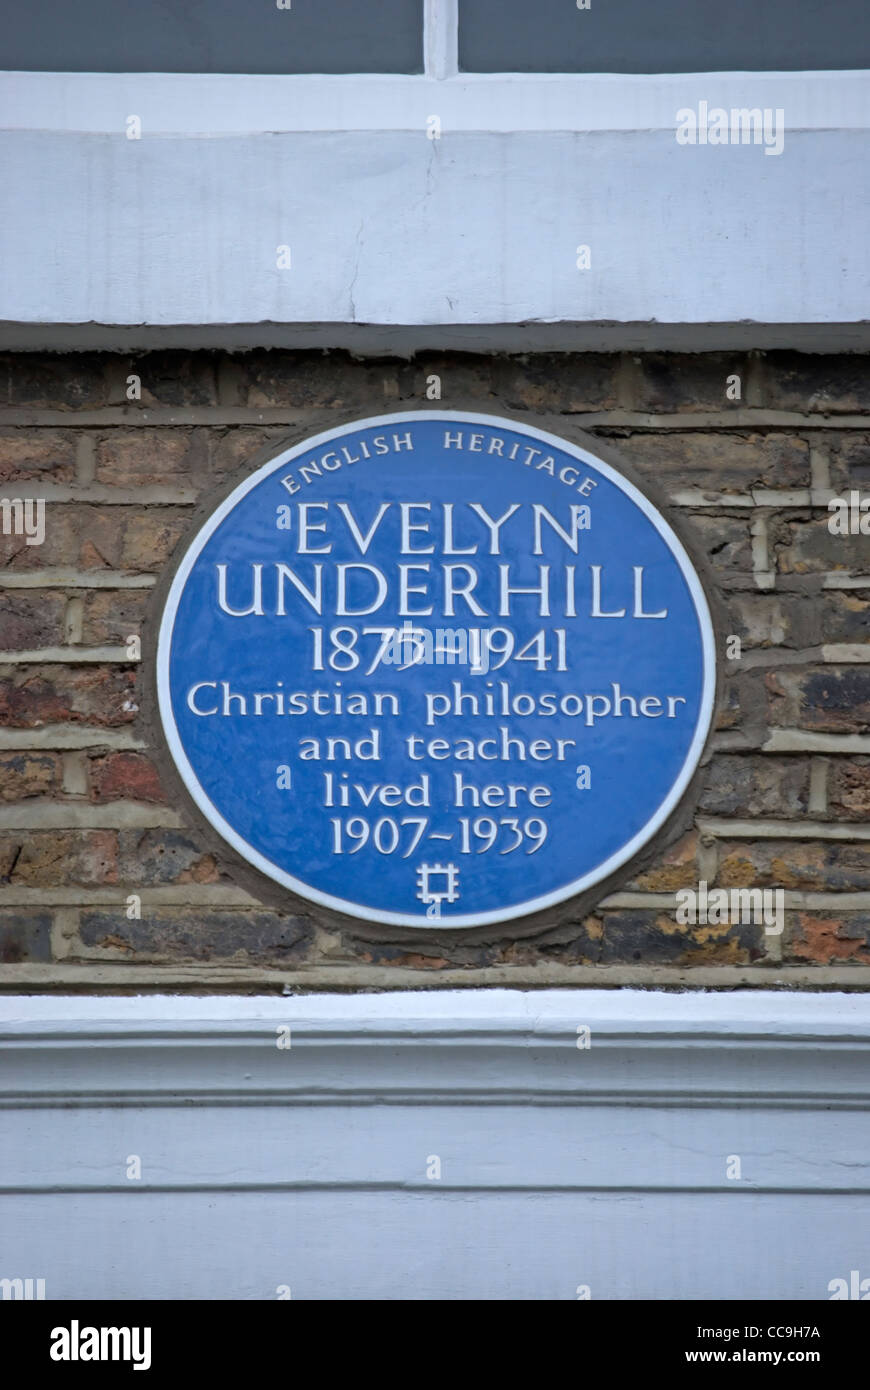 english heritage blue plaque marking a home of christian philosopher and teacher, evelyn underhill, london, england Stock Photo